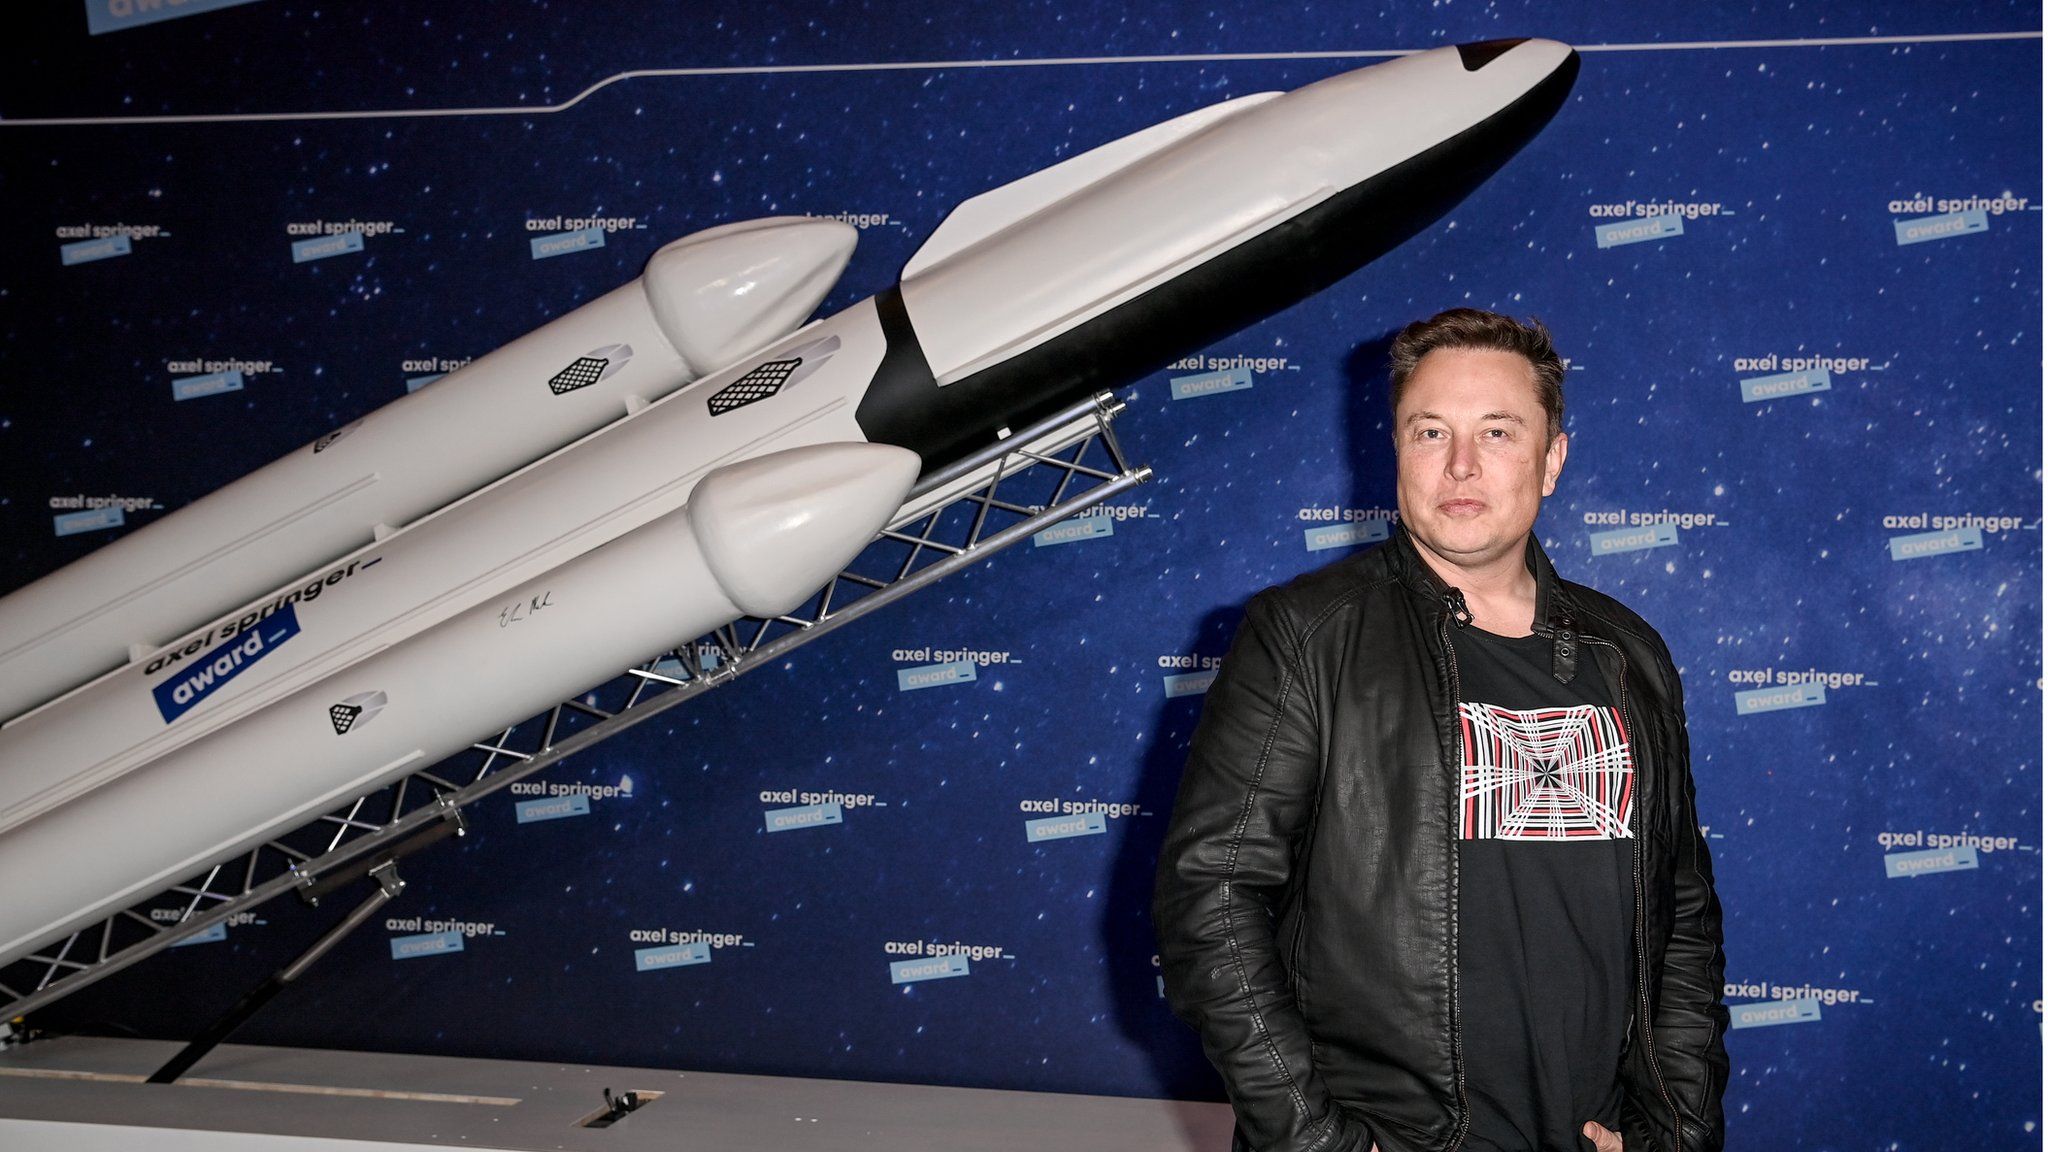 Indonesia has put itself forward as a possible rocket launch site for Elon Musk's SpaceX venture.